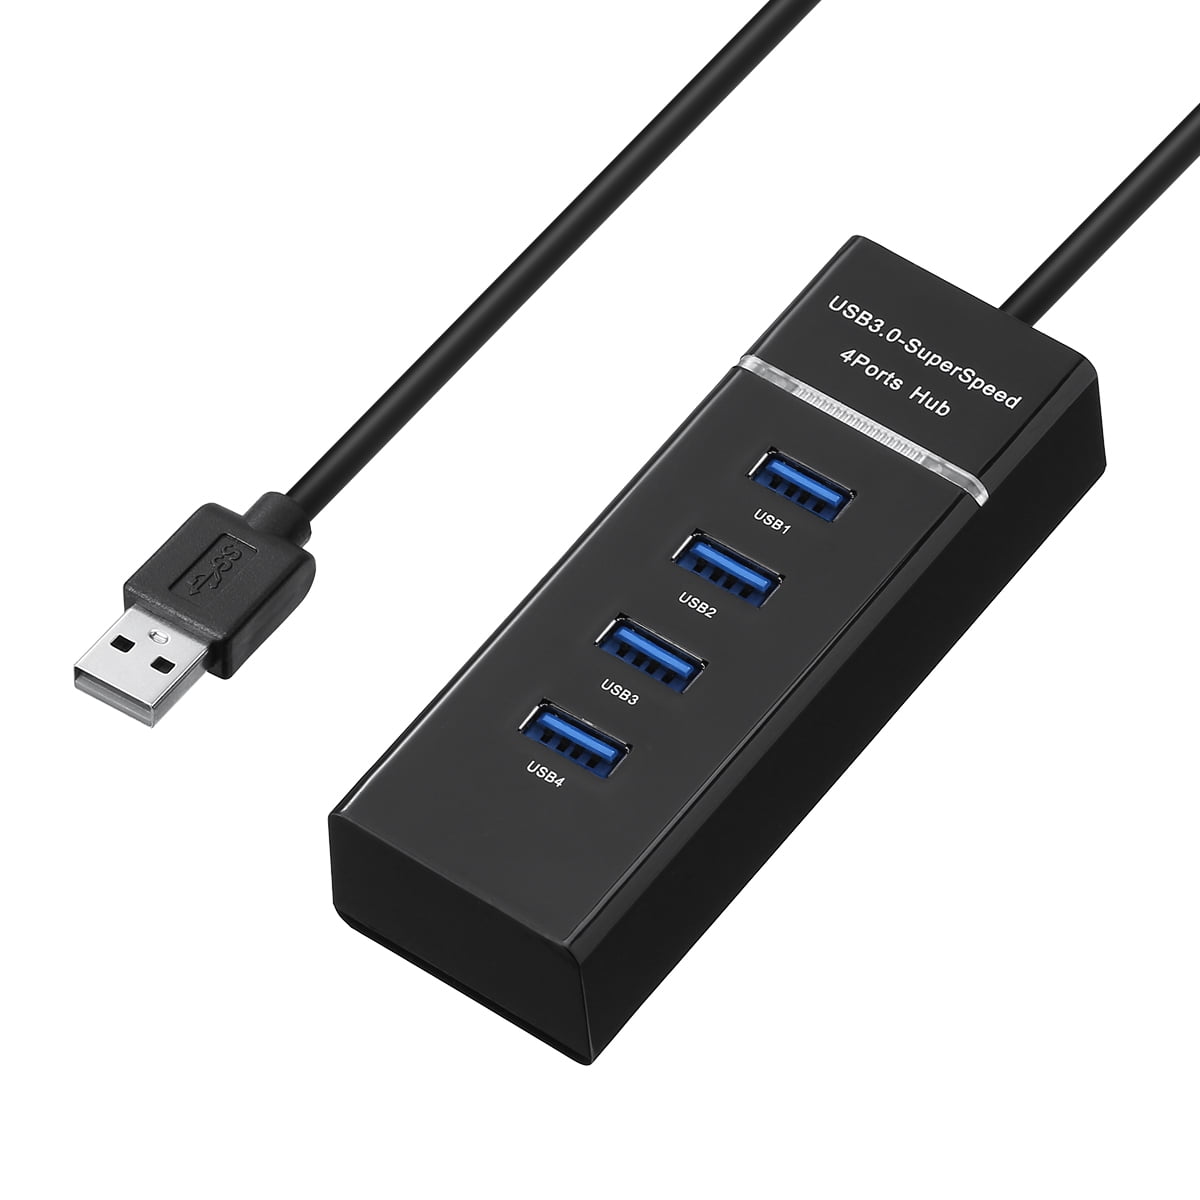 USB 3.0 HUB Superspeed 4 Ports USB Expander With Cable For PC Laptop Macbook AU 